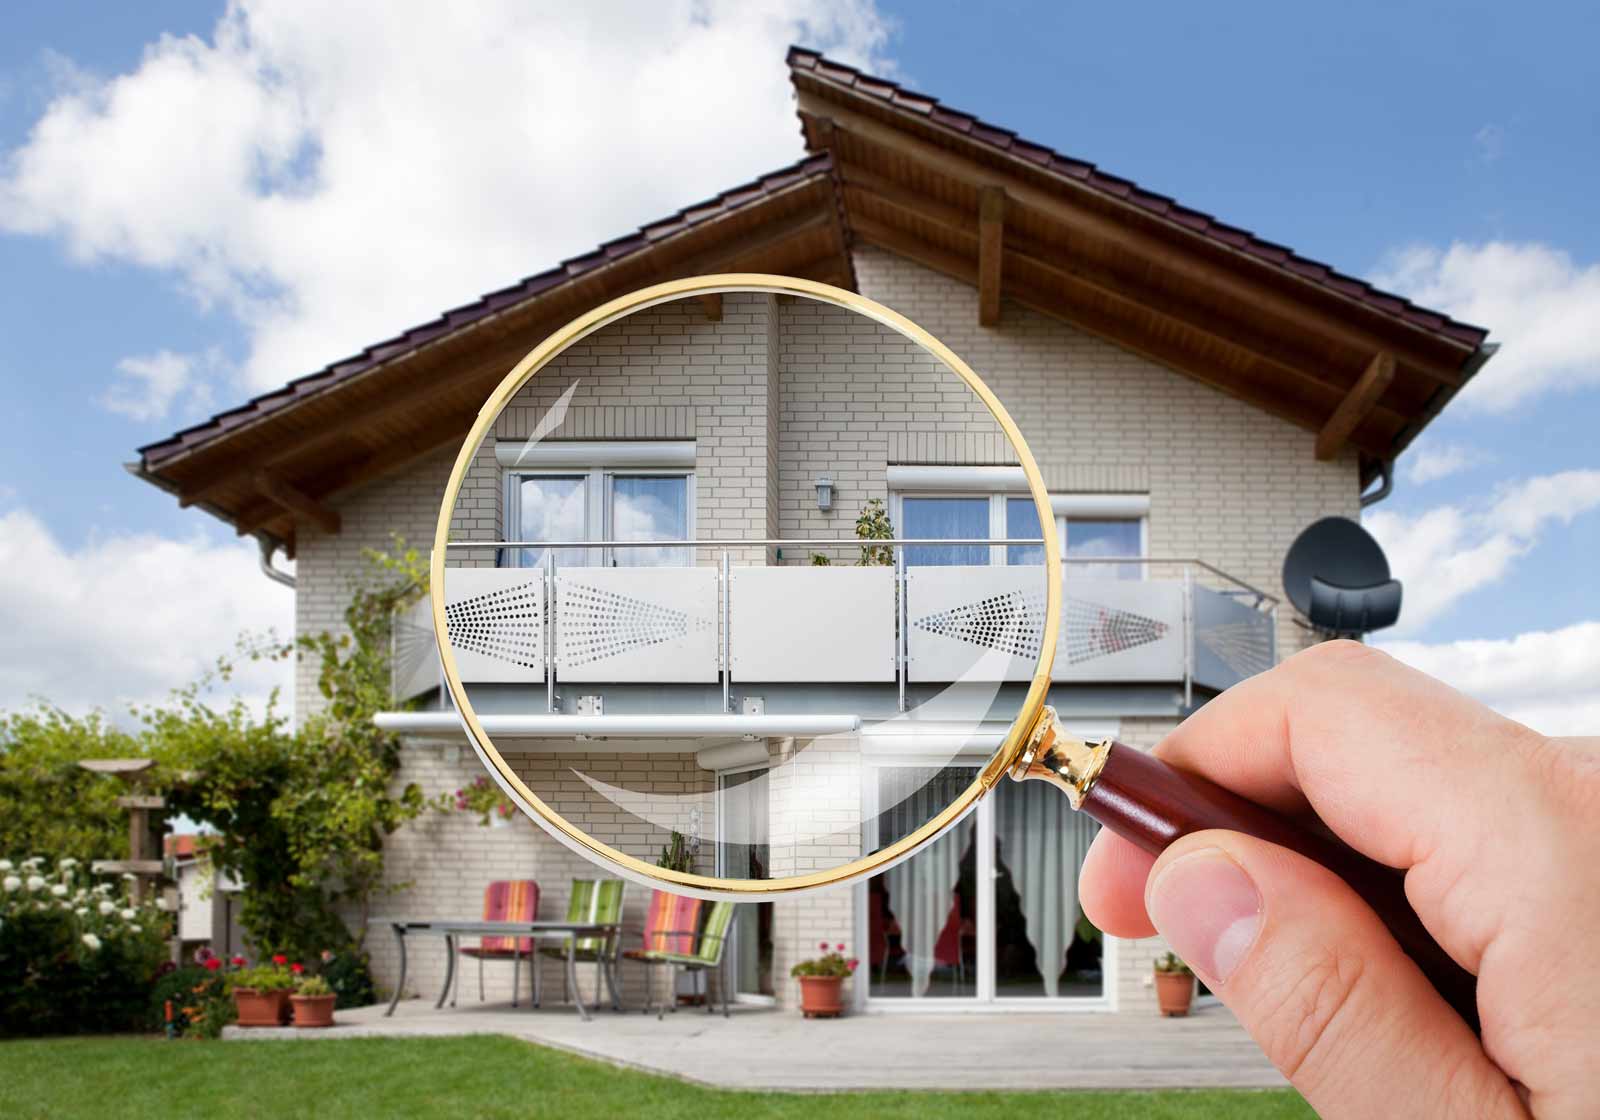 Exterior Home Inspections